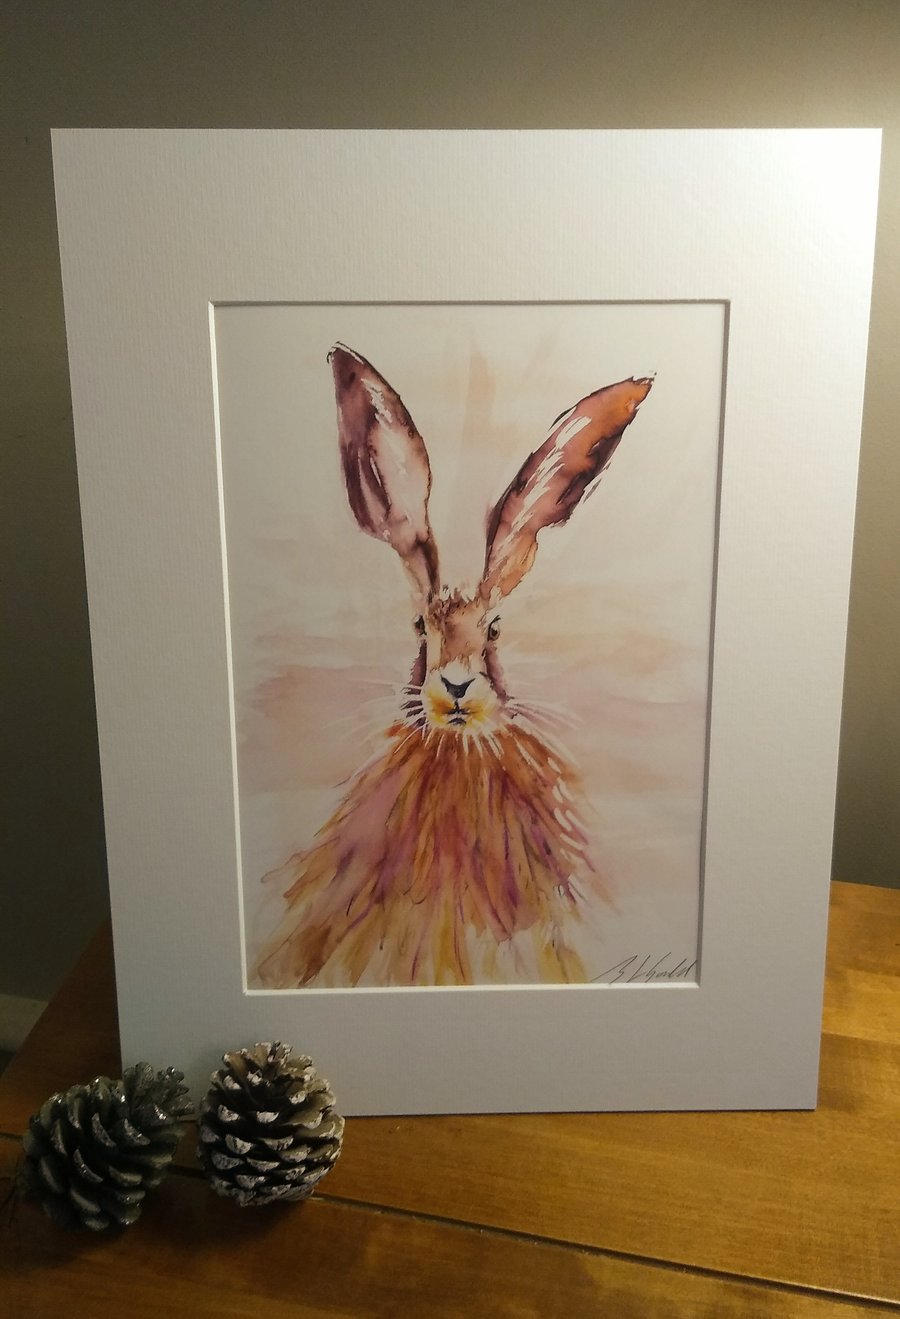 Mounted A4 signed Art Print - Hare 